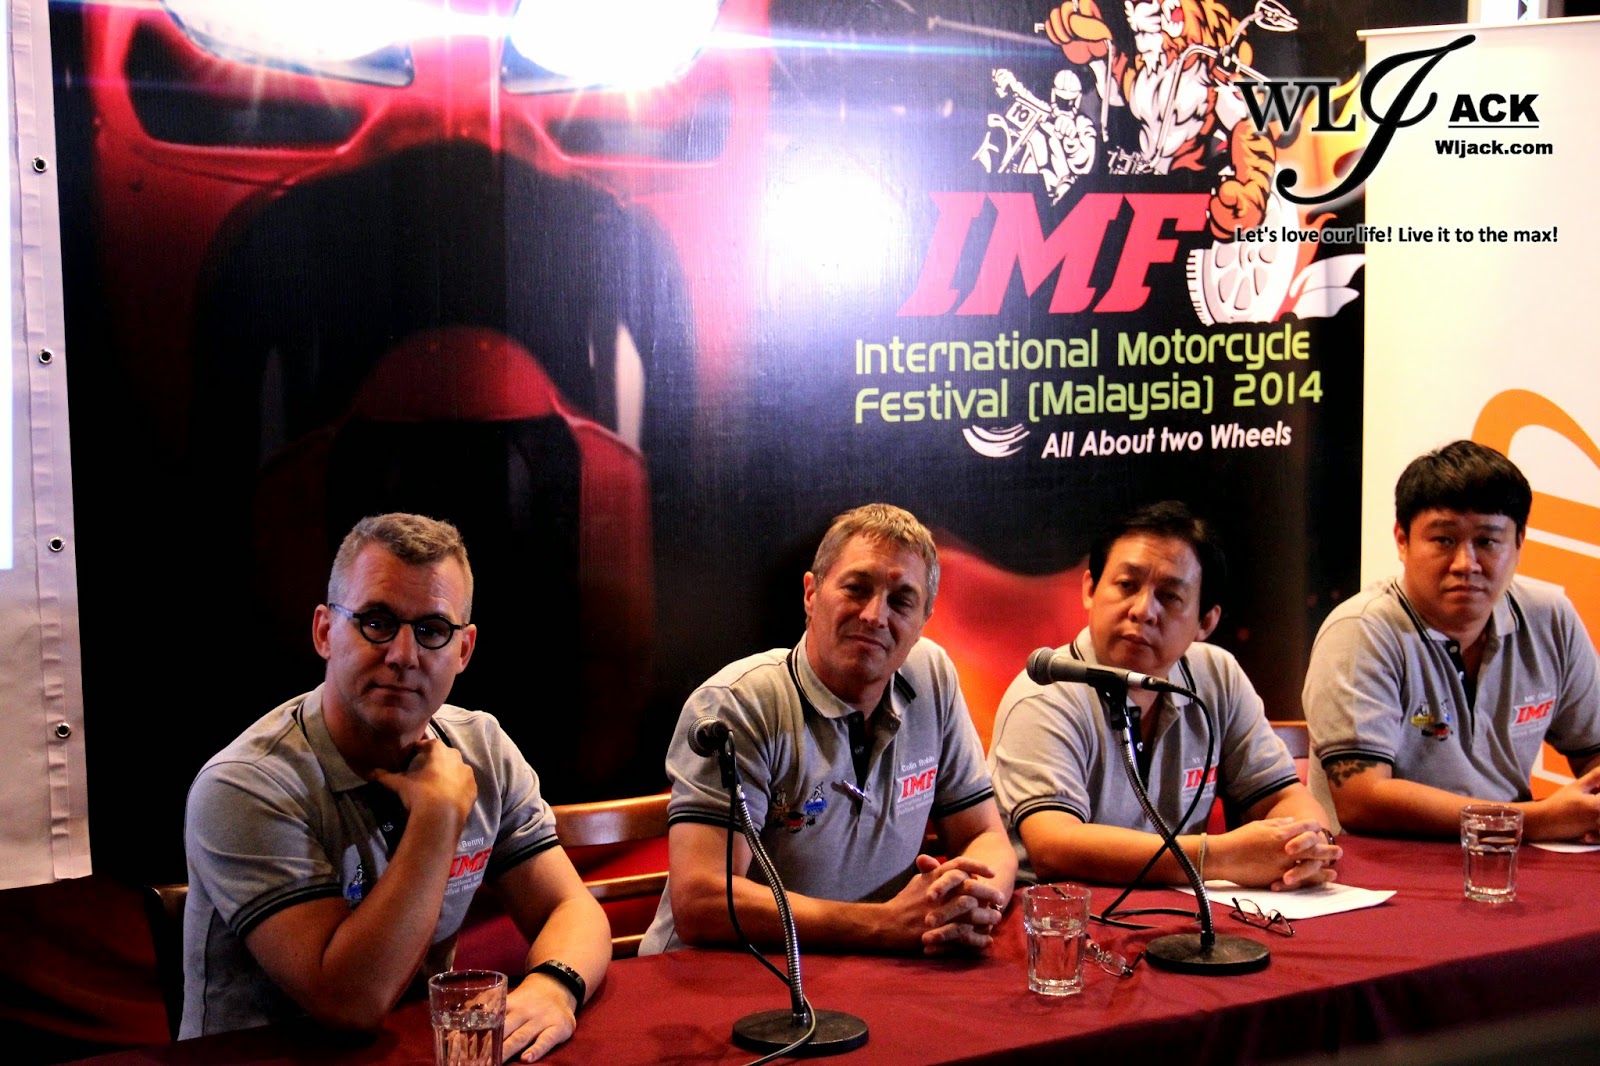 [Motorsport] Press Conference of International Motorcycle Festival (Malaysia) 2014